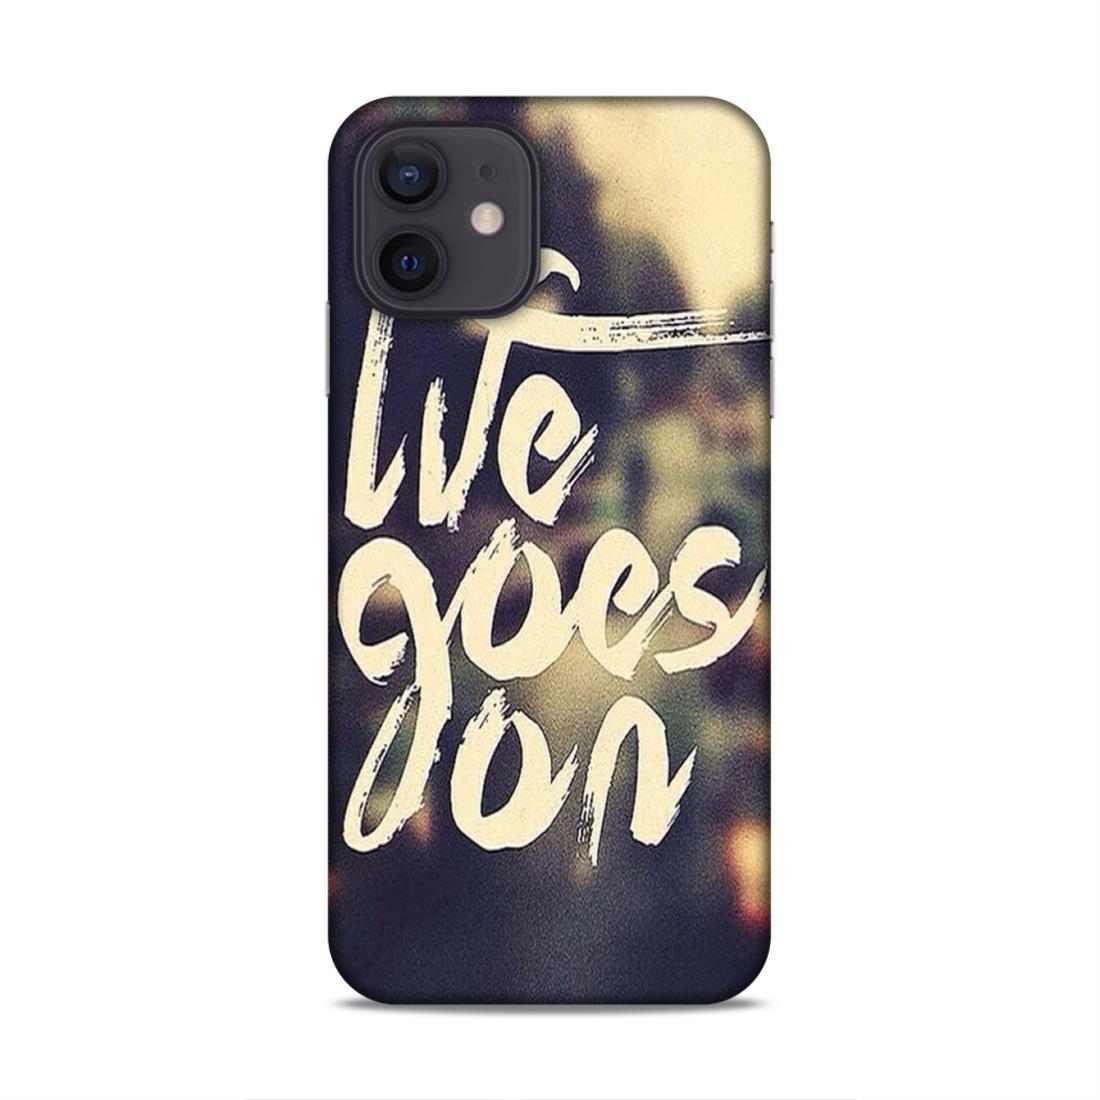 Life Goes On iPhone 12 Mobile Cover Case